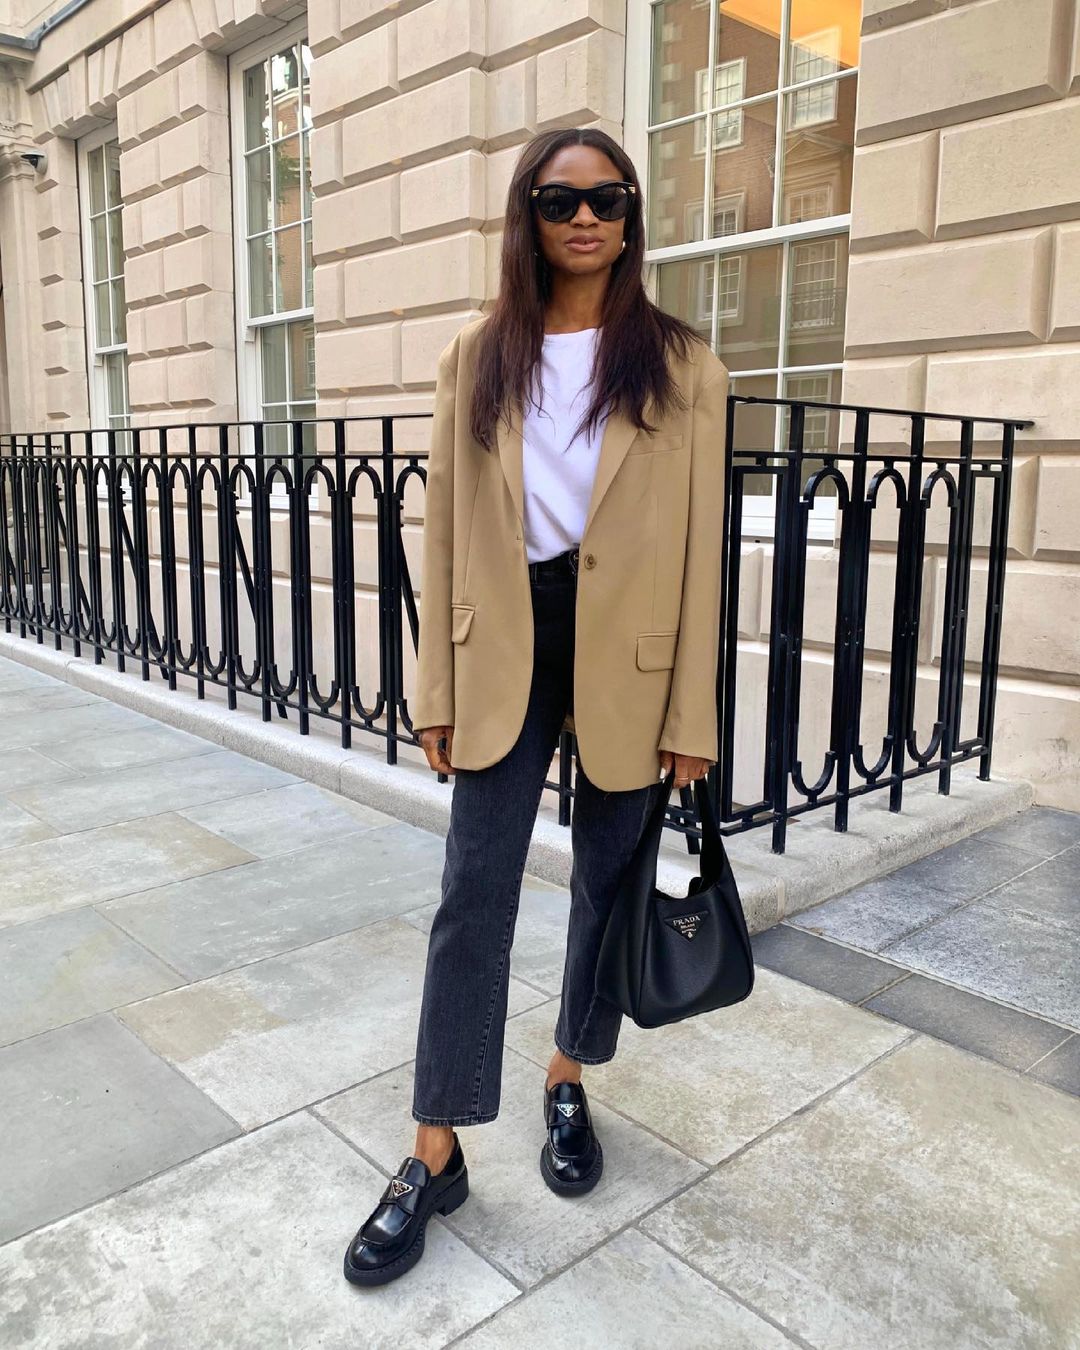 The 5 Best Shoes to Wear With Black Jeans for Women | Who What Wear